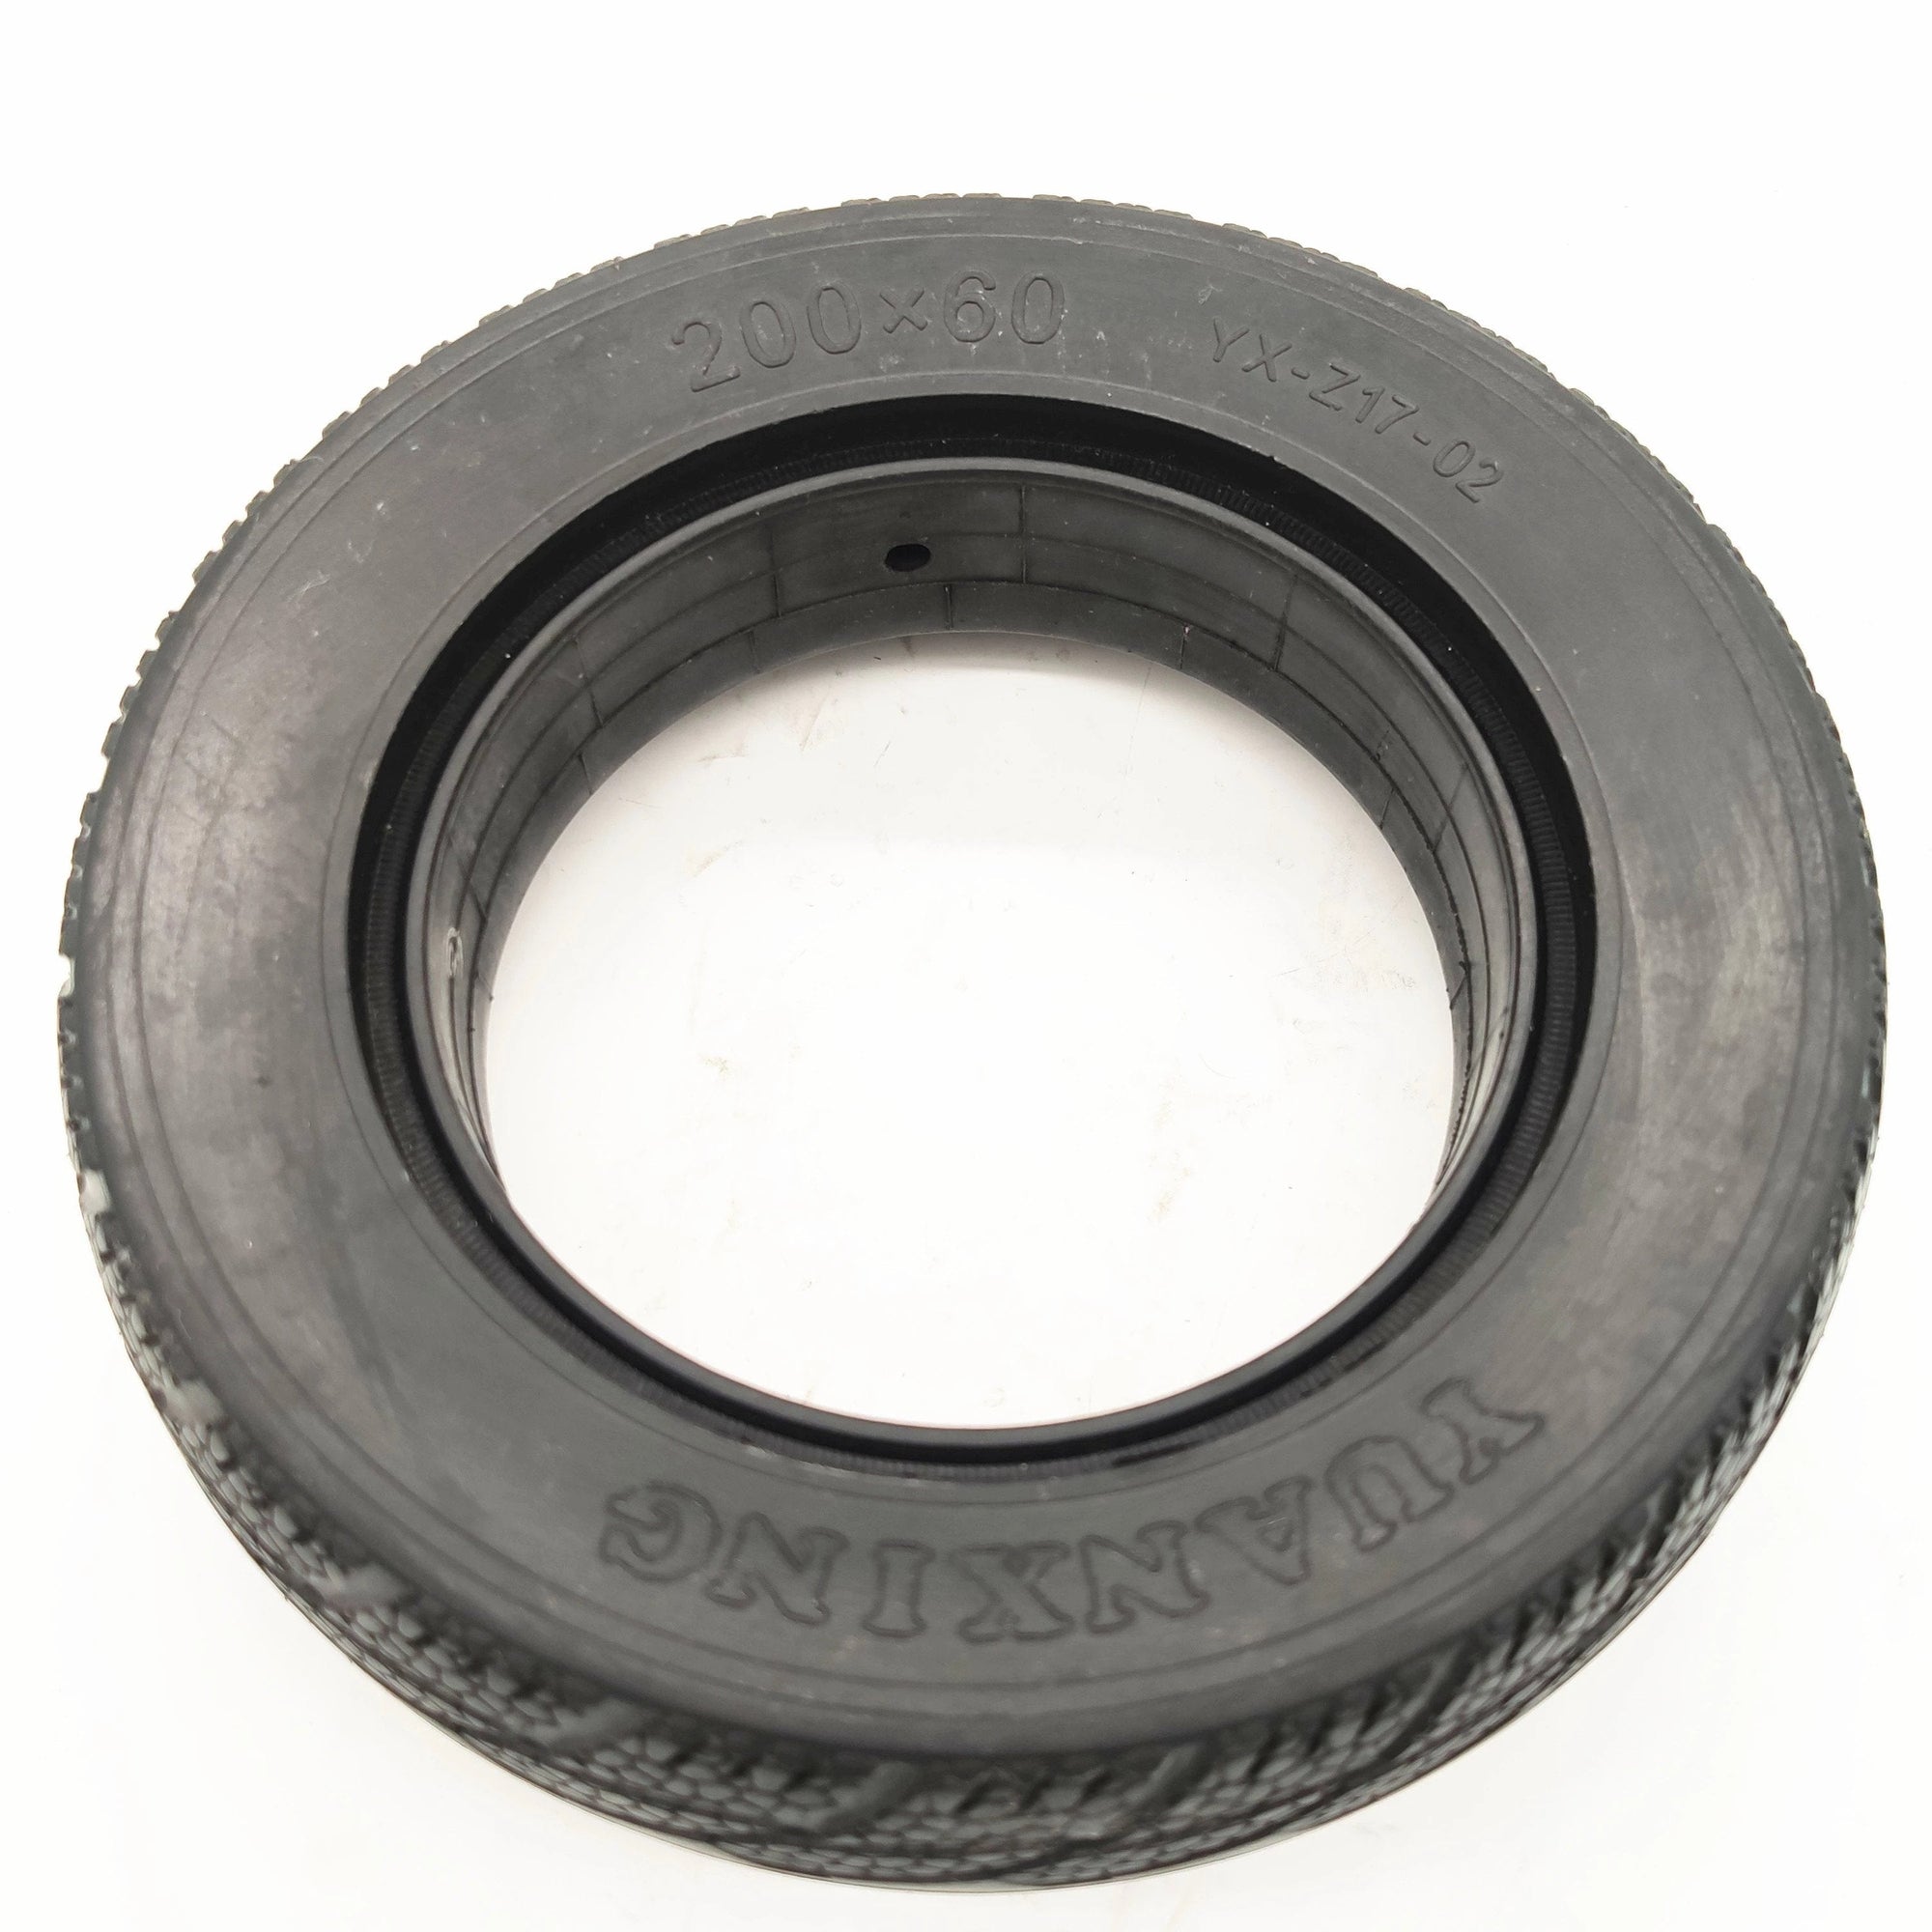 Photo of 200x60 Minimotors Solid Tire spare part